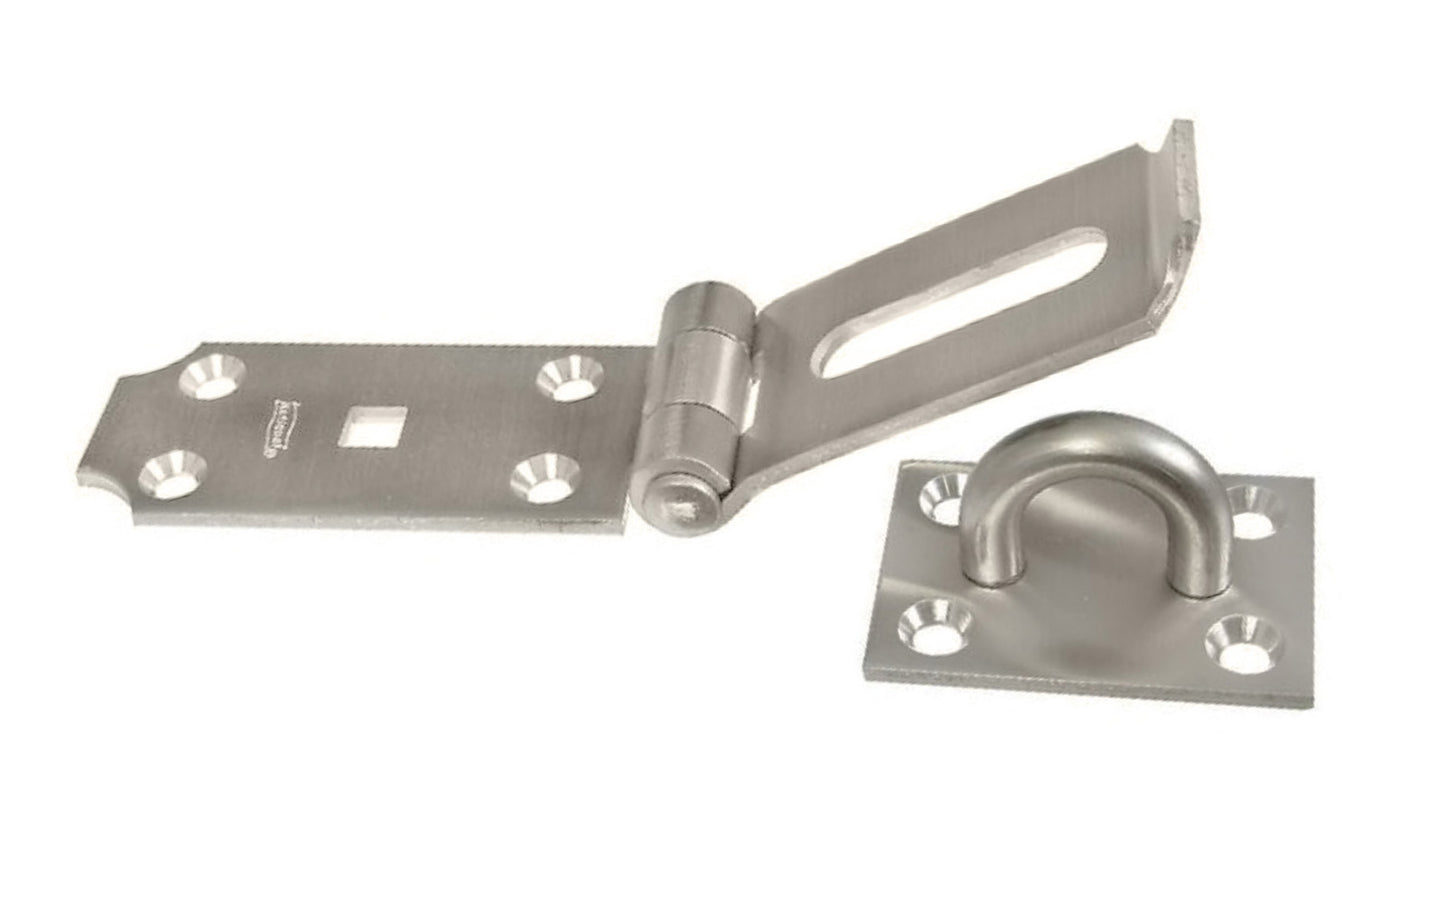 7-1/2" stainless steel heavy duty safety hasp. ACQ safe - safe for use with premium woods like cedar & redwood. Can be used on around-the-corner applications. Square center hole accepts carriage bolt for added security. Includes a rigid, non-swivel staple. 038613342552. HD SS Hasp. National Hardware Model No. N342-550